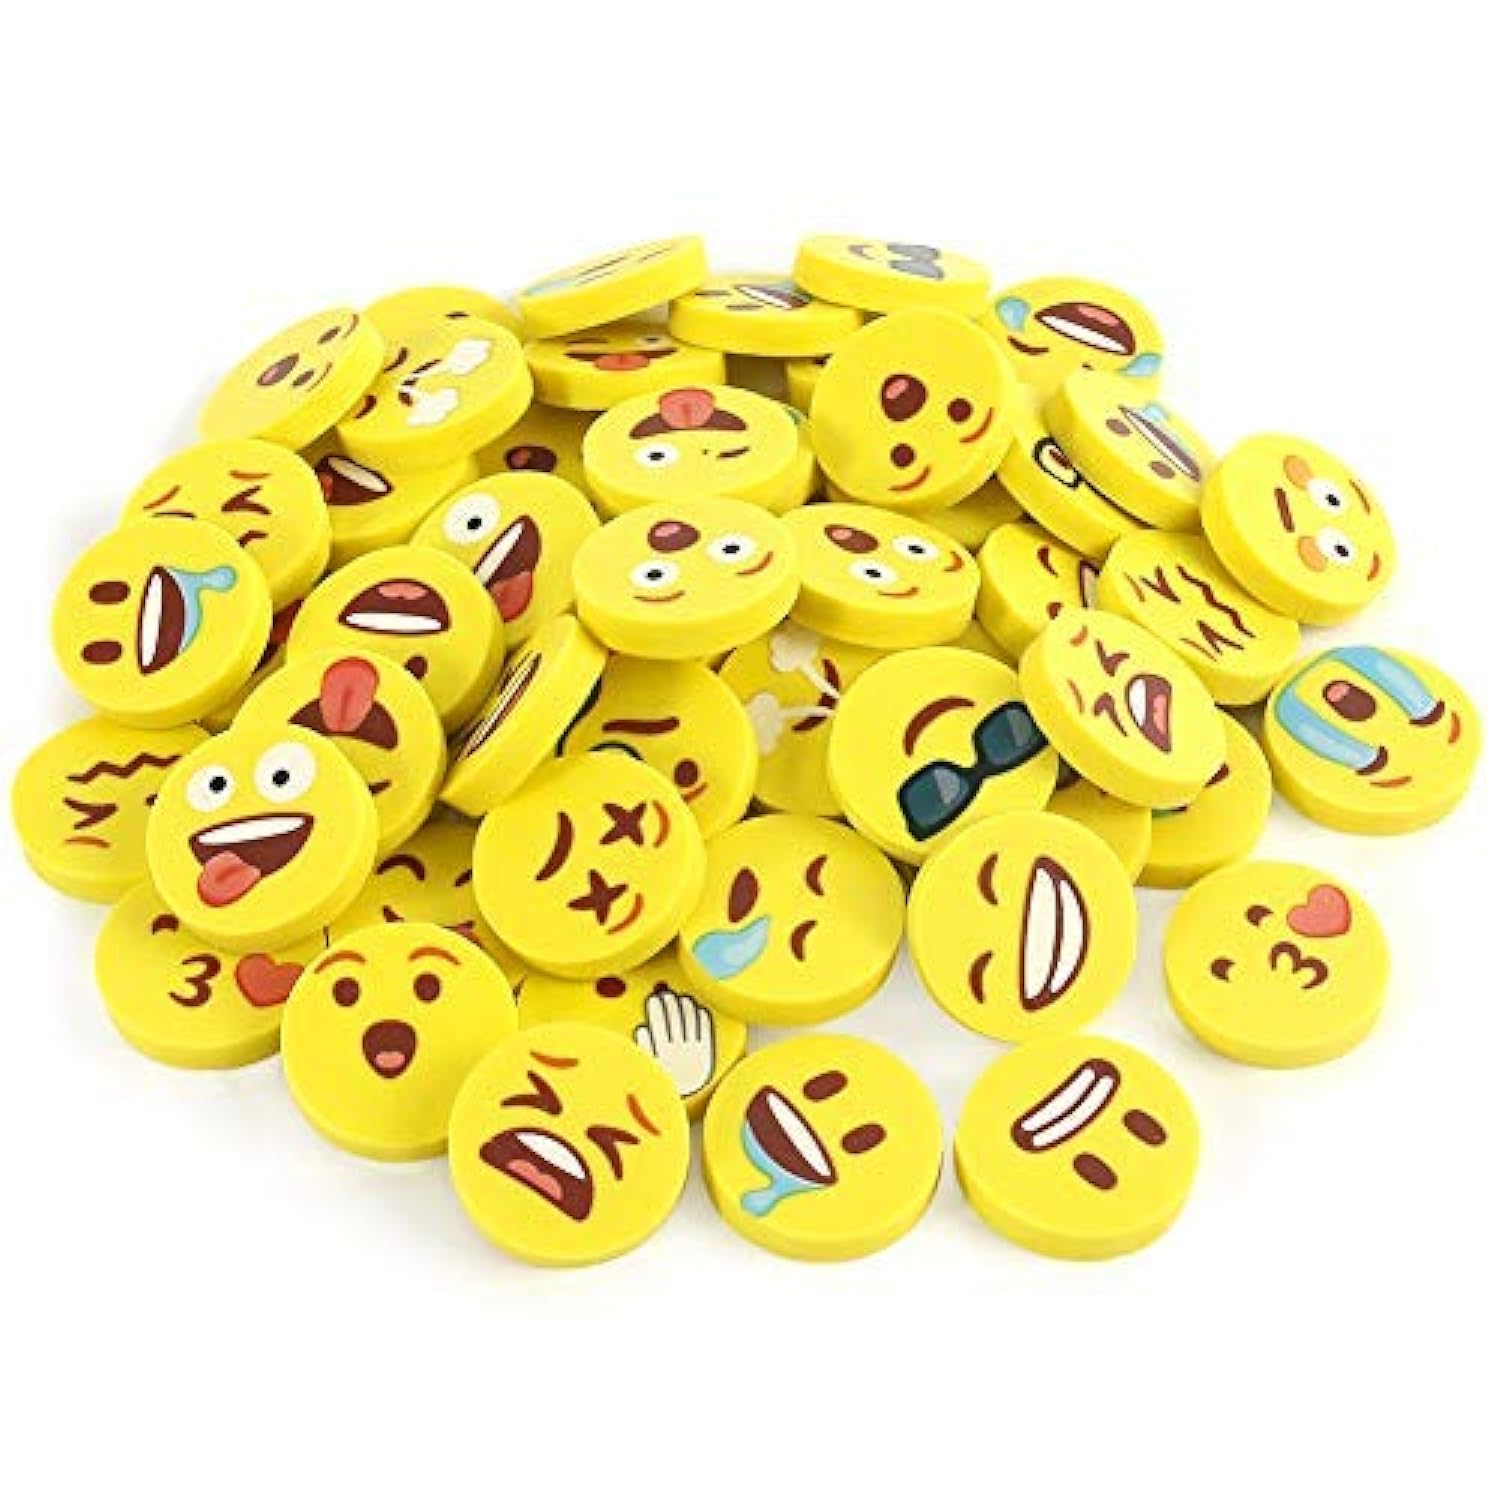 Great Choice Products Mini Erasers, 60 Pcs Novelty Erasers Mini Pencil Erasers Yellow Fun Erasers For Students Classroom Rewards Gift Bag Filler